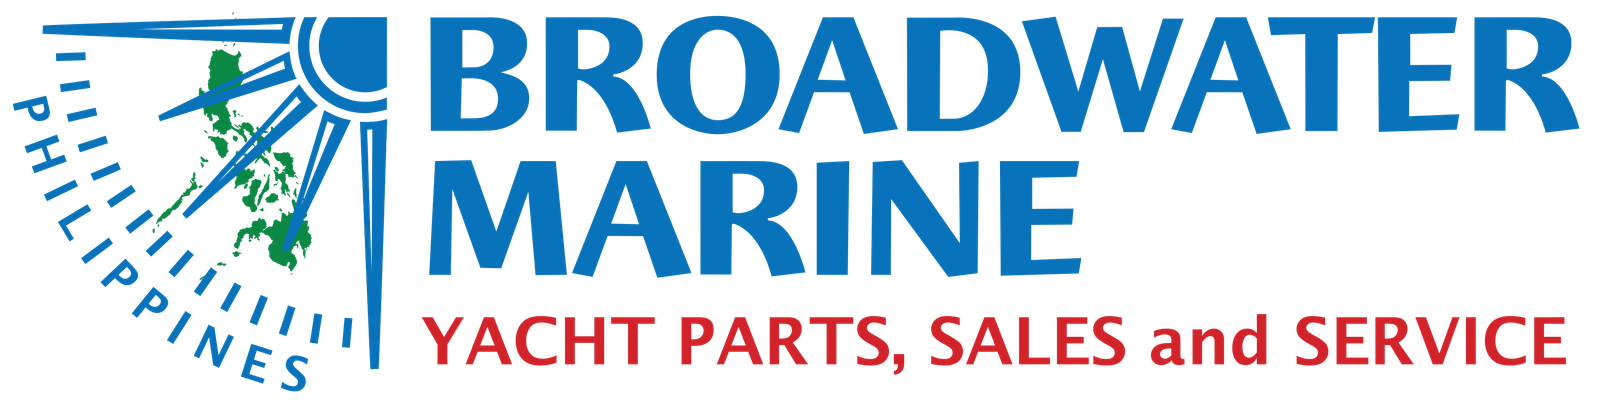 broadwater marine yacht parts, sales and services